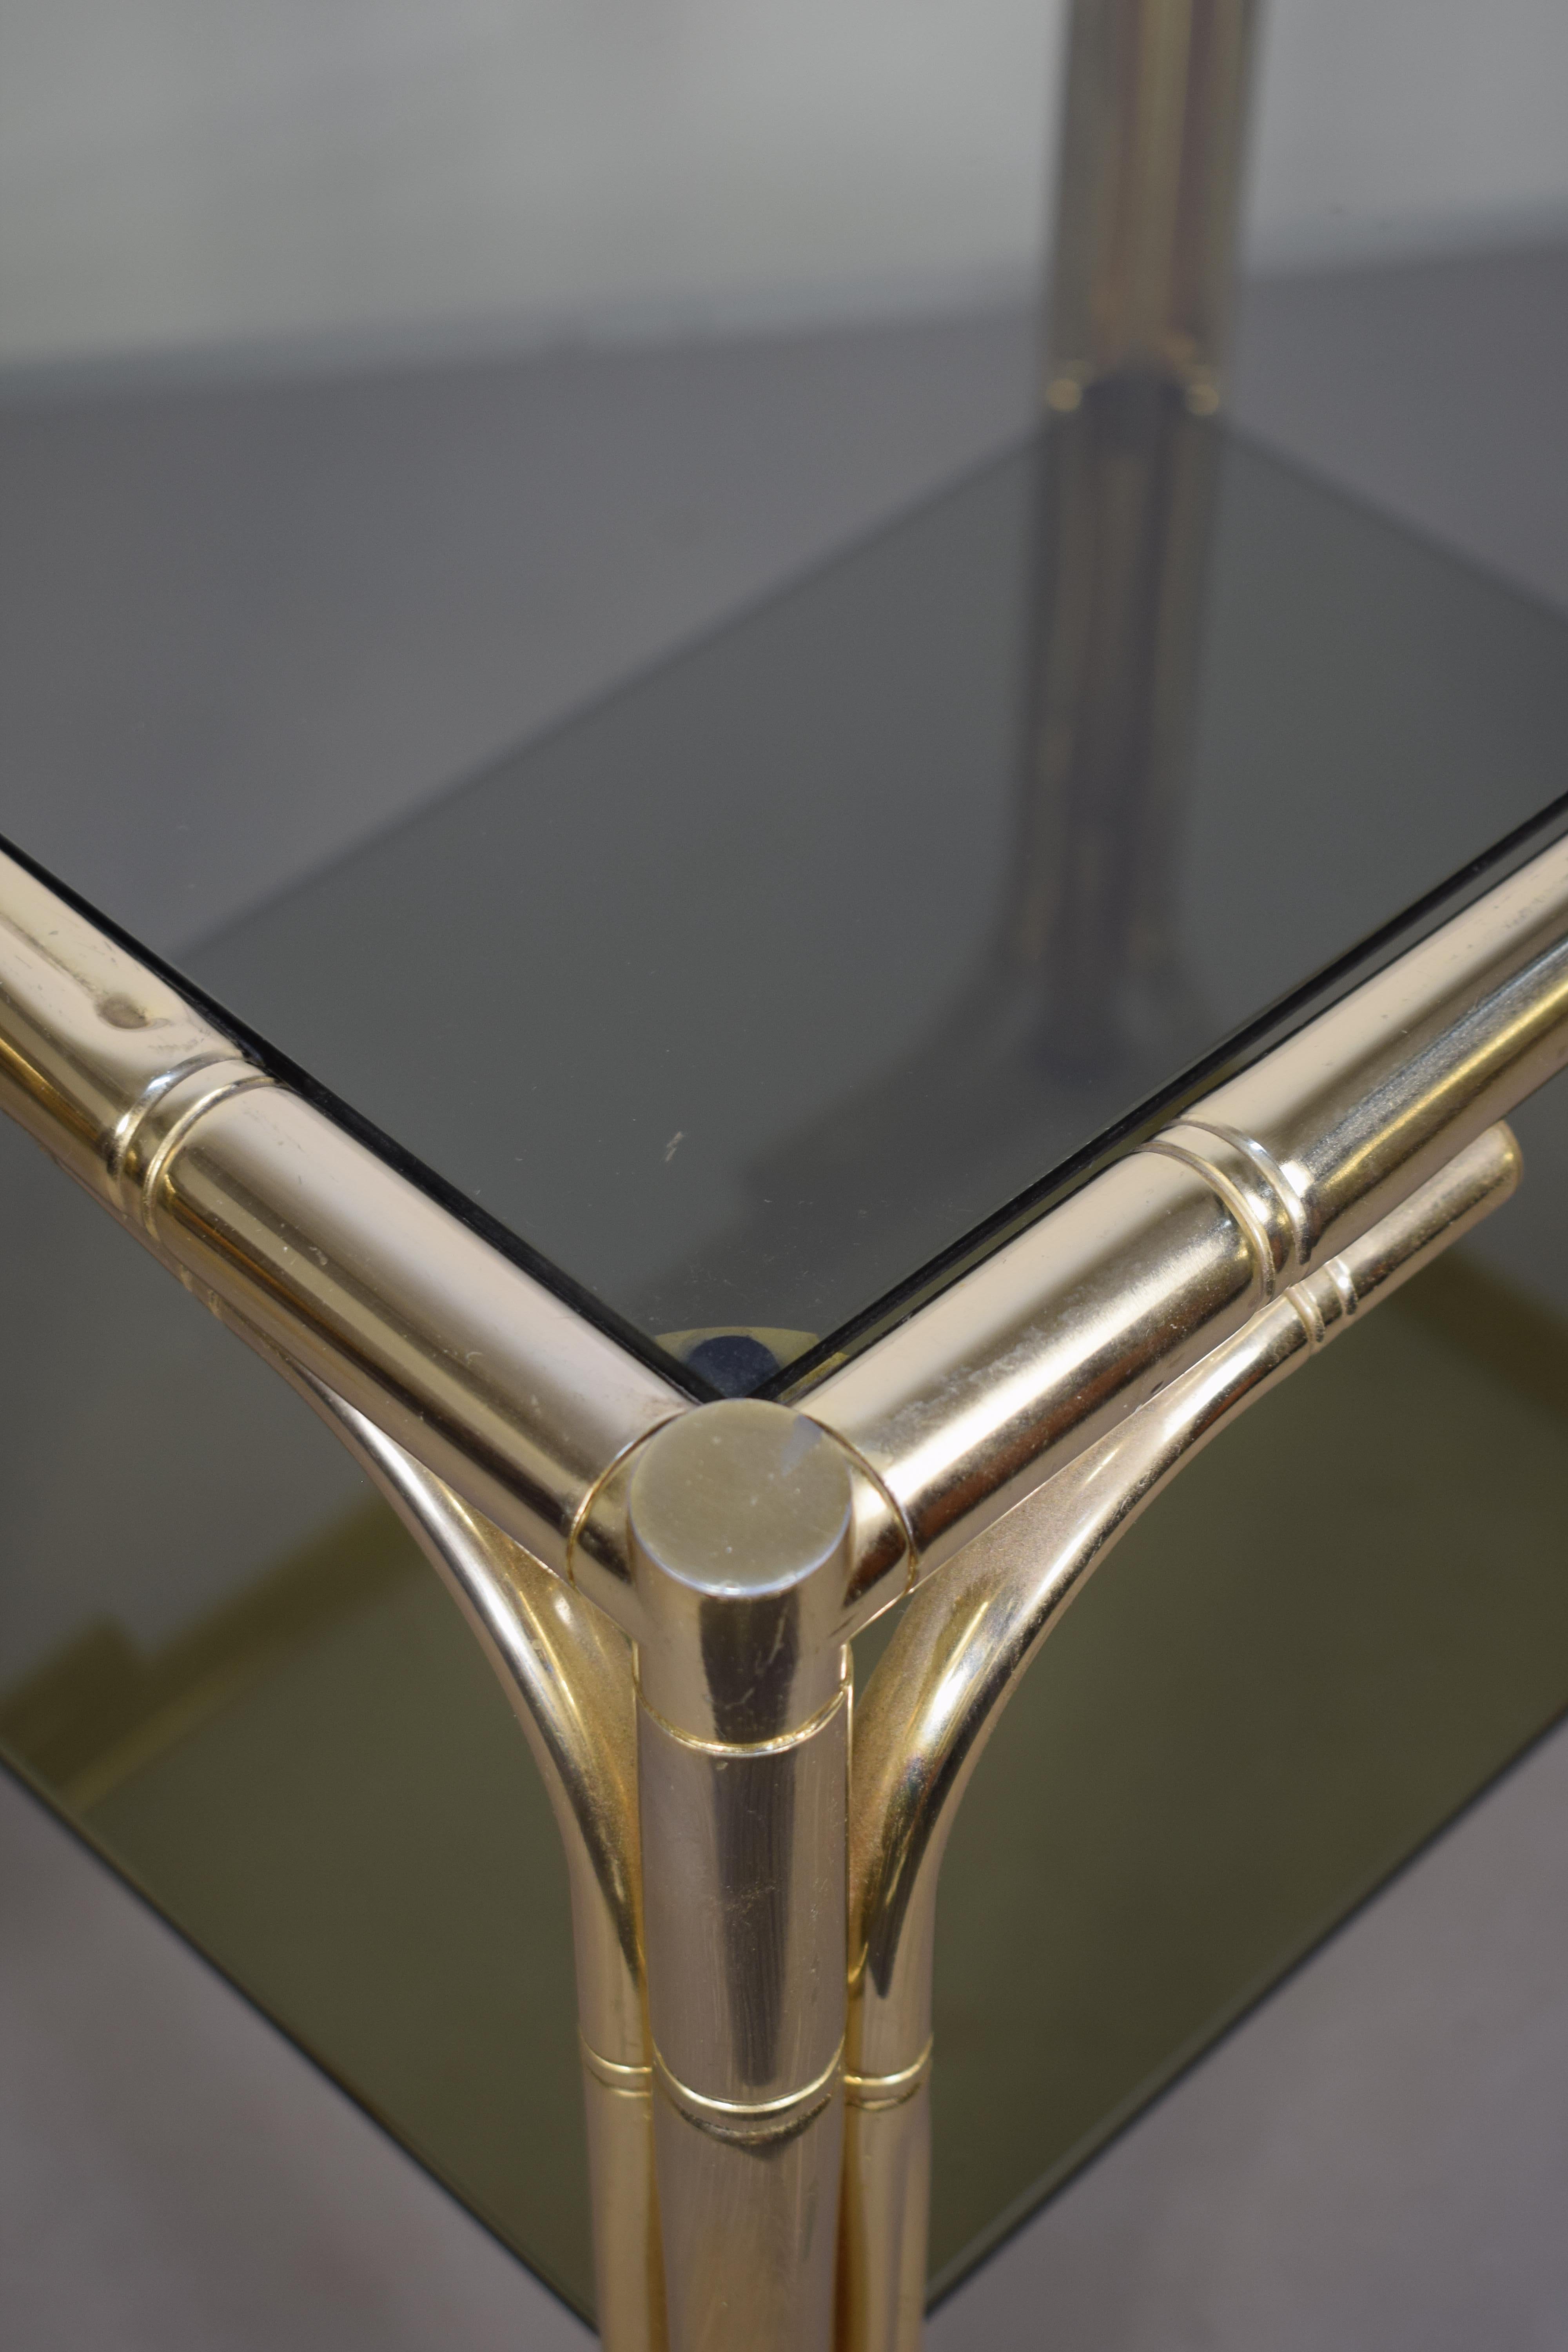 Pair of Italian coffee table, golden metal and smoked glass, 1970s.

Dimensions: H= 52 cm; W= 50 cm; D= 38 cm.